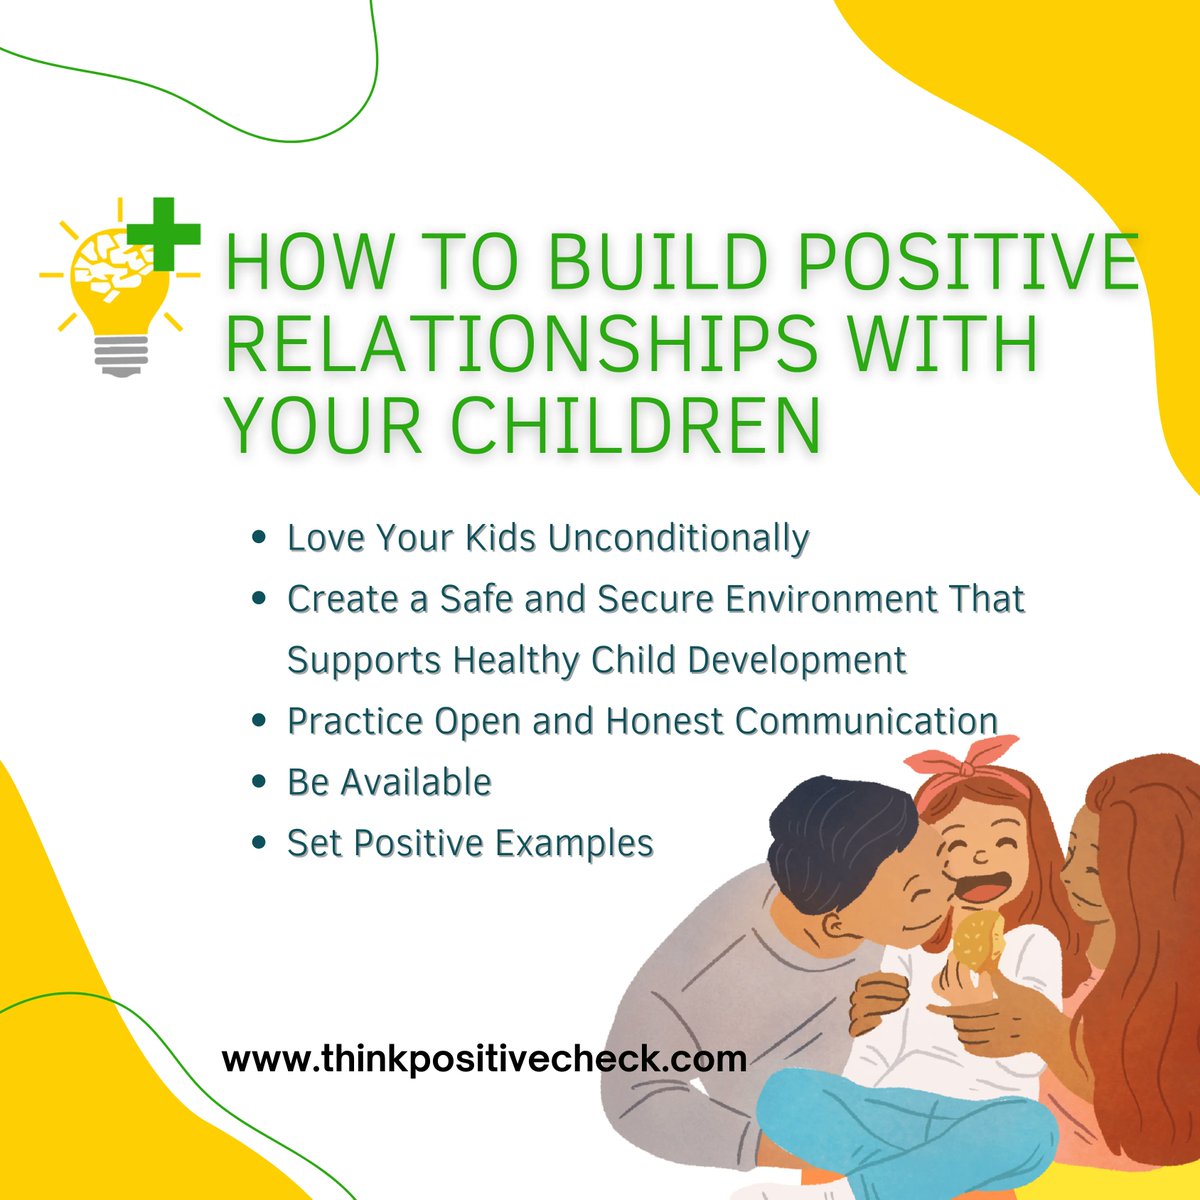 ✅5 Key Parental Roles for Building Positive Relationships With Your Children 
🌐 buff.ly/417XQRm

#thinkpositivecheck #positive #believe #feelgood #thinkpositive #parentingcoaching #newparents #relationship #parentinglife #parentingcoach #parentinggoals #positivemindset